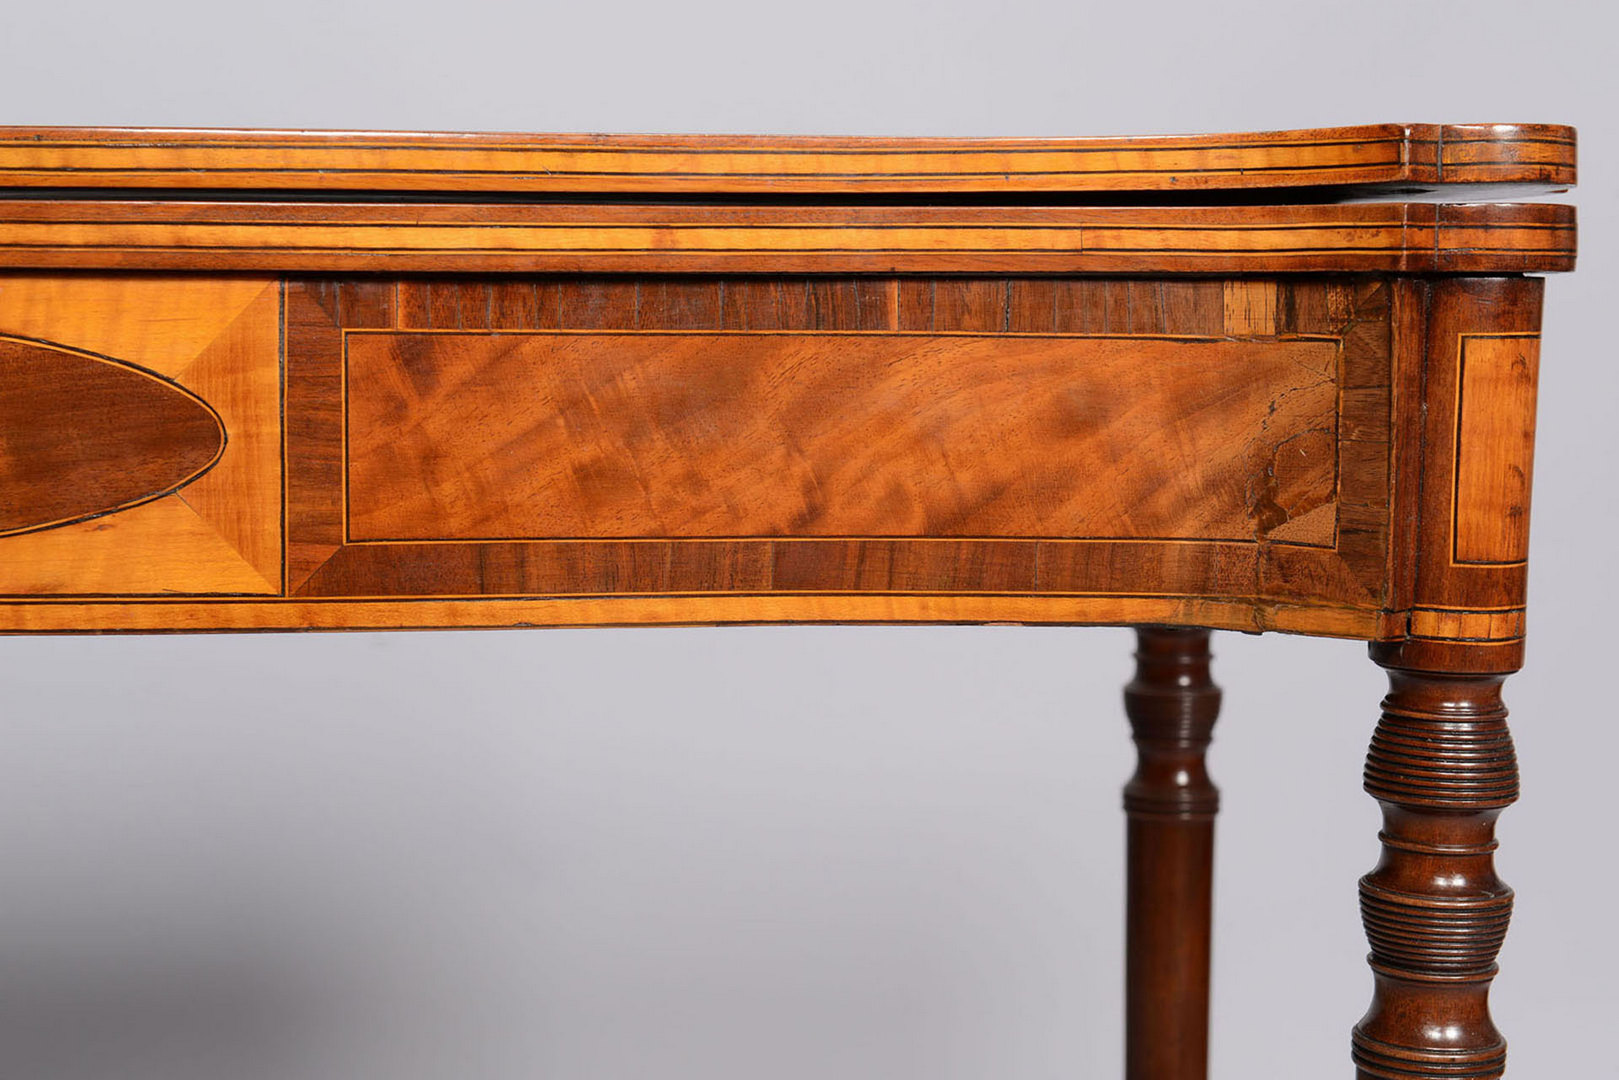 Lot 48: Federal Inlaid Card Table